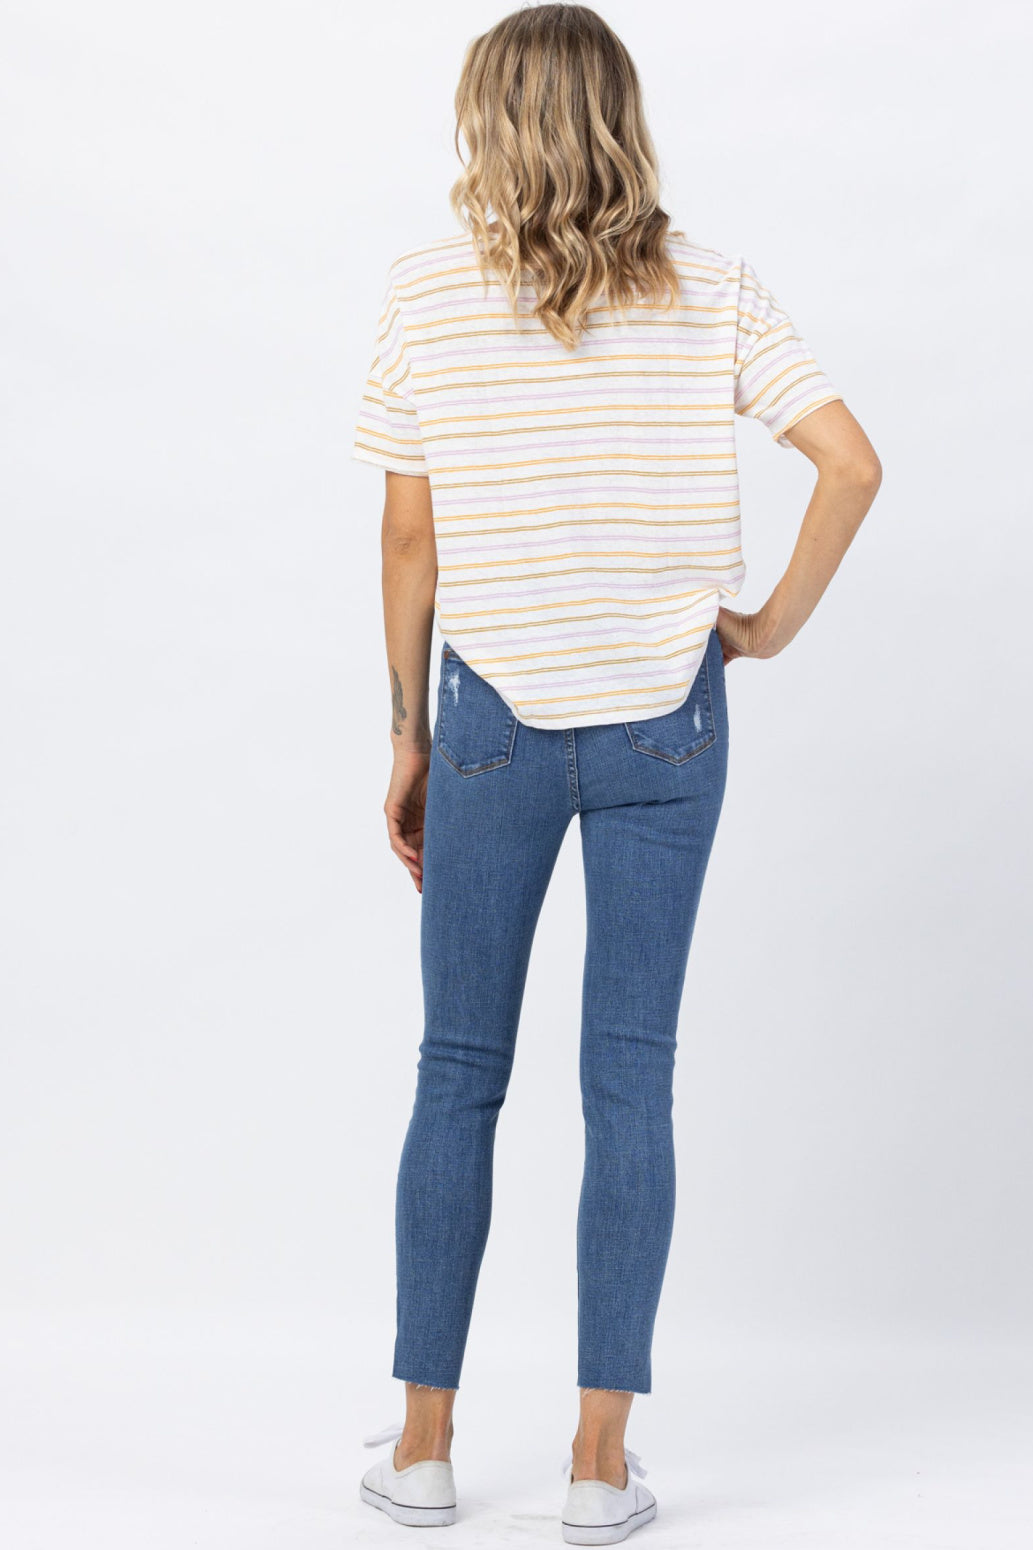 Judy Blue Dandelion Embroidered High Rise Skinny Jeans Style 88415